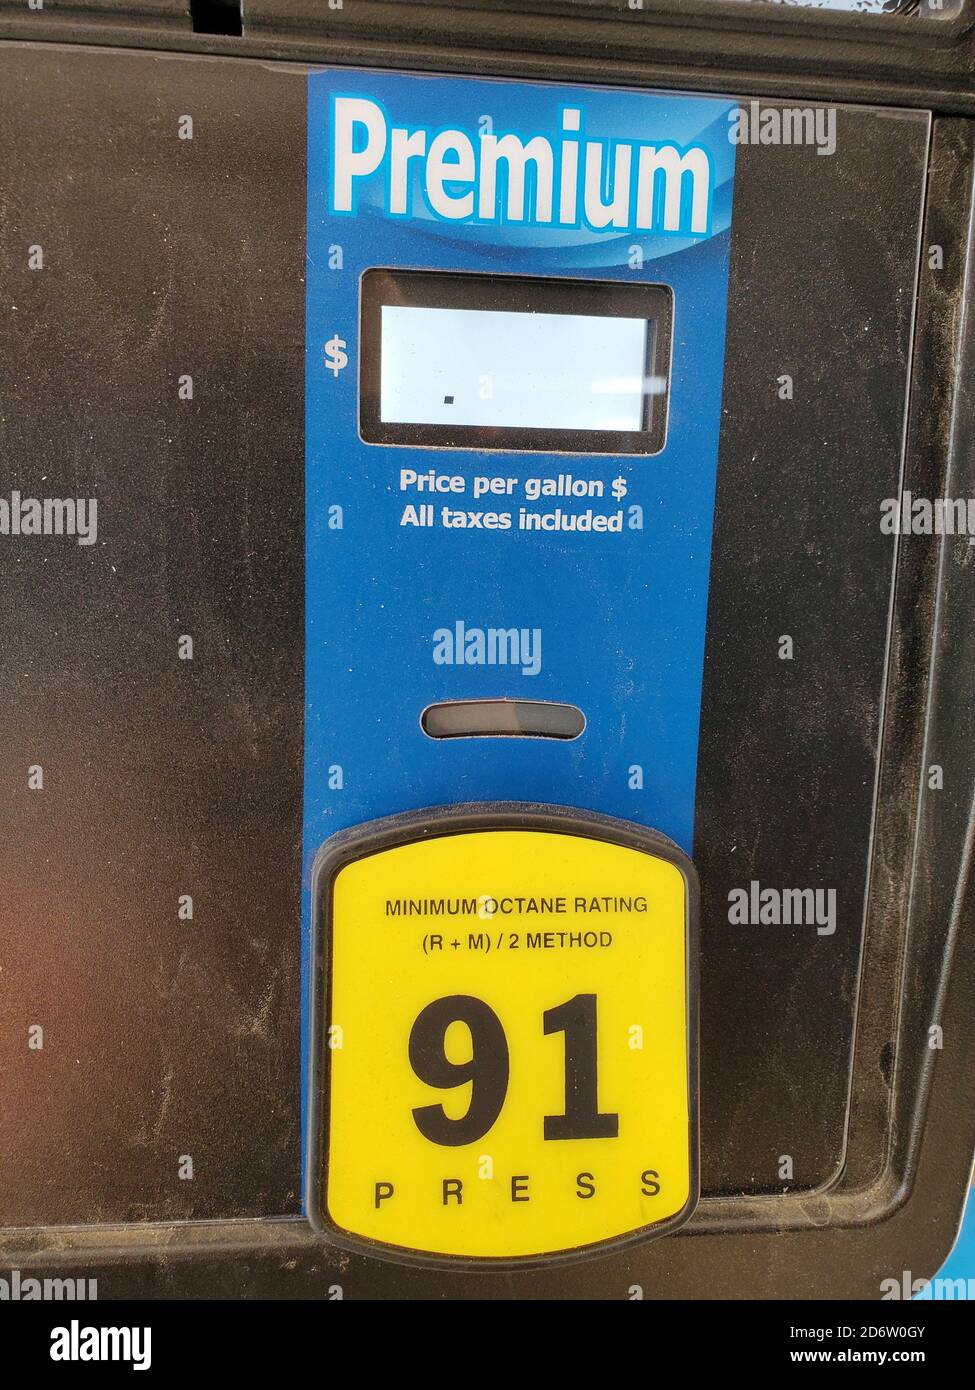 Close-up of octane rating of 91 octane for Premium gasoline on a fuel pump in a gas station setting, San Ramon, California, August 28, 2020. () Stock Photo